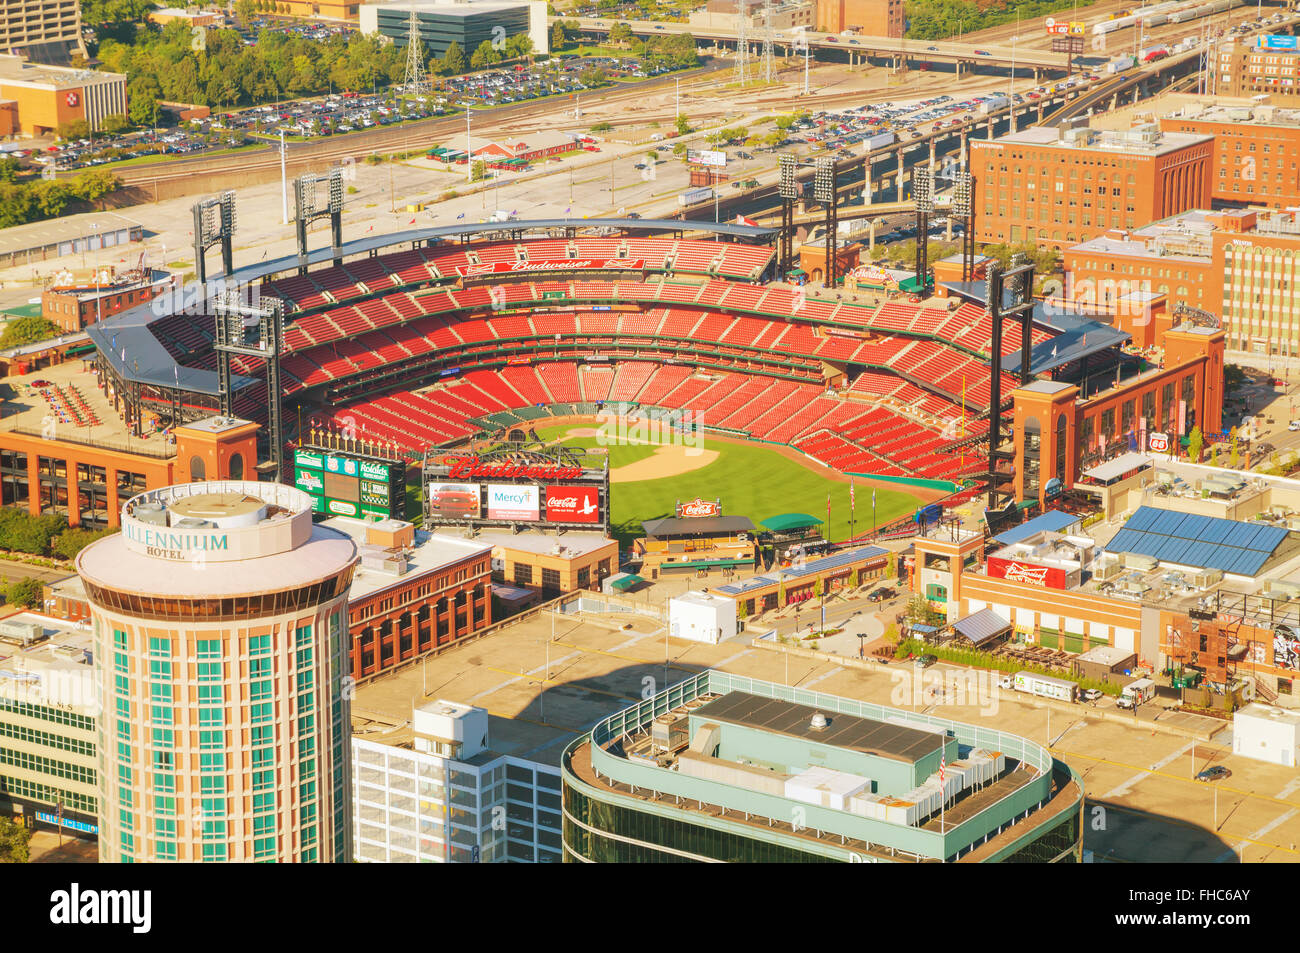 ST LOUIS, MO - AUGUST 26: Busch baseball stadium on August 26, 2015 in St Louis, MO. Stock Photo